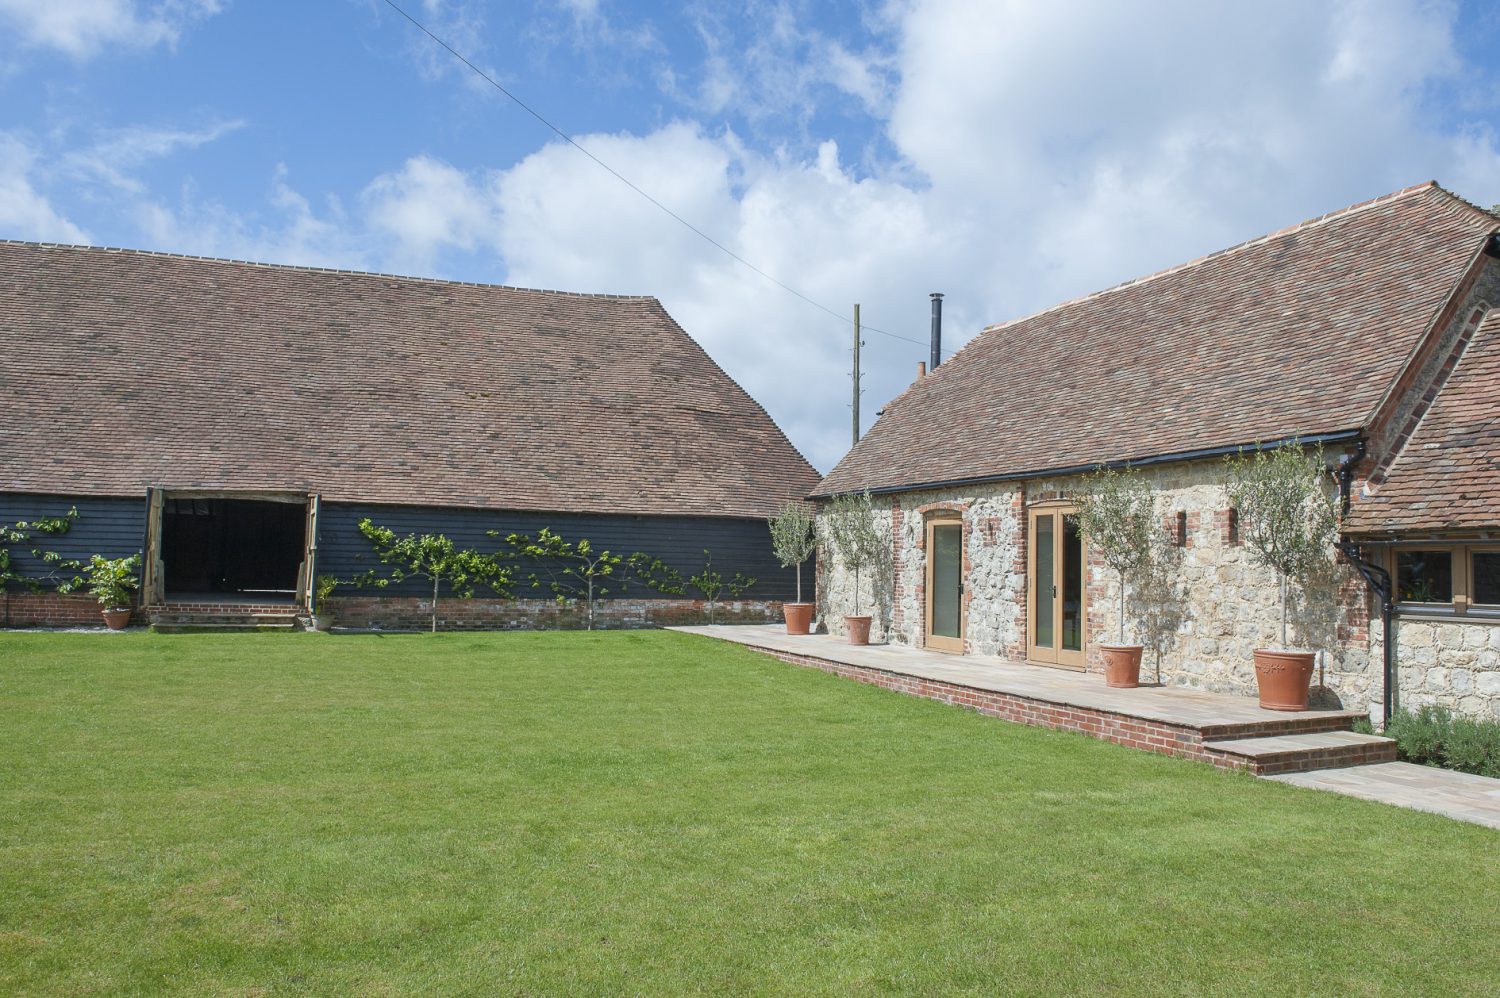 The traditional 16th century Kent threshing barn covers an area of some 350 square metres and features a soaring vaulted interior and truly breathtaking timberwork